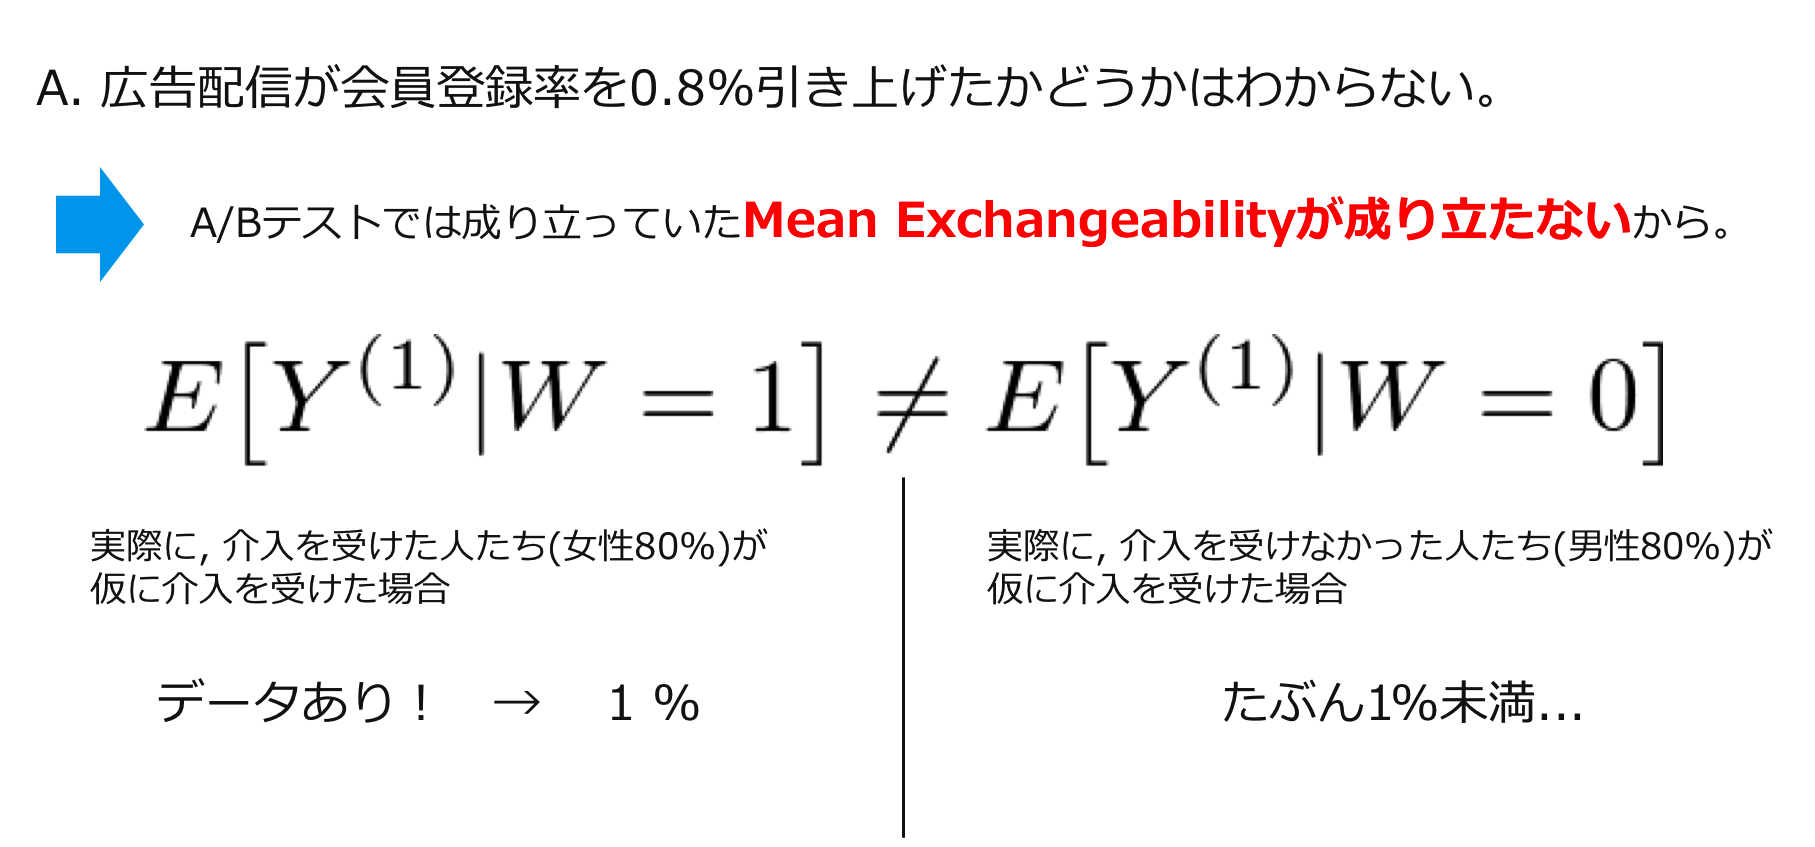 exchangeability_fails.png